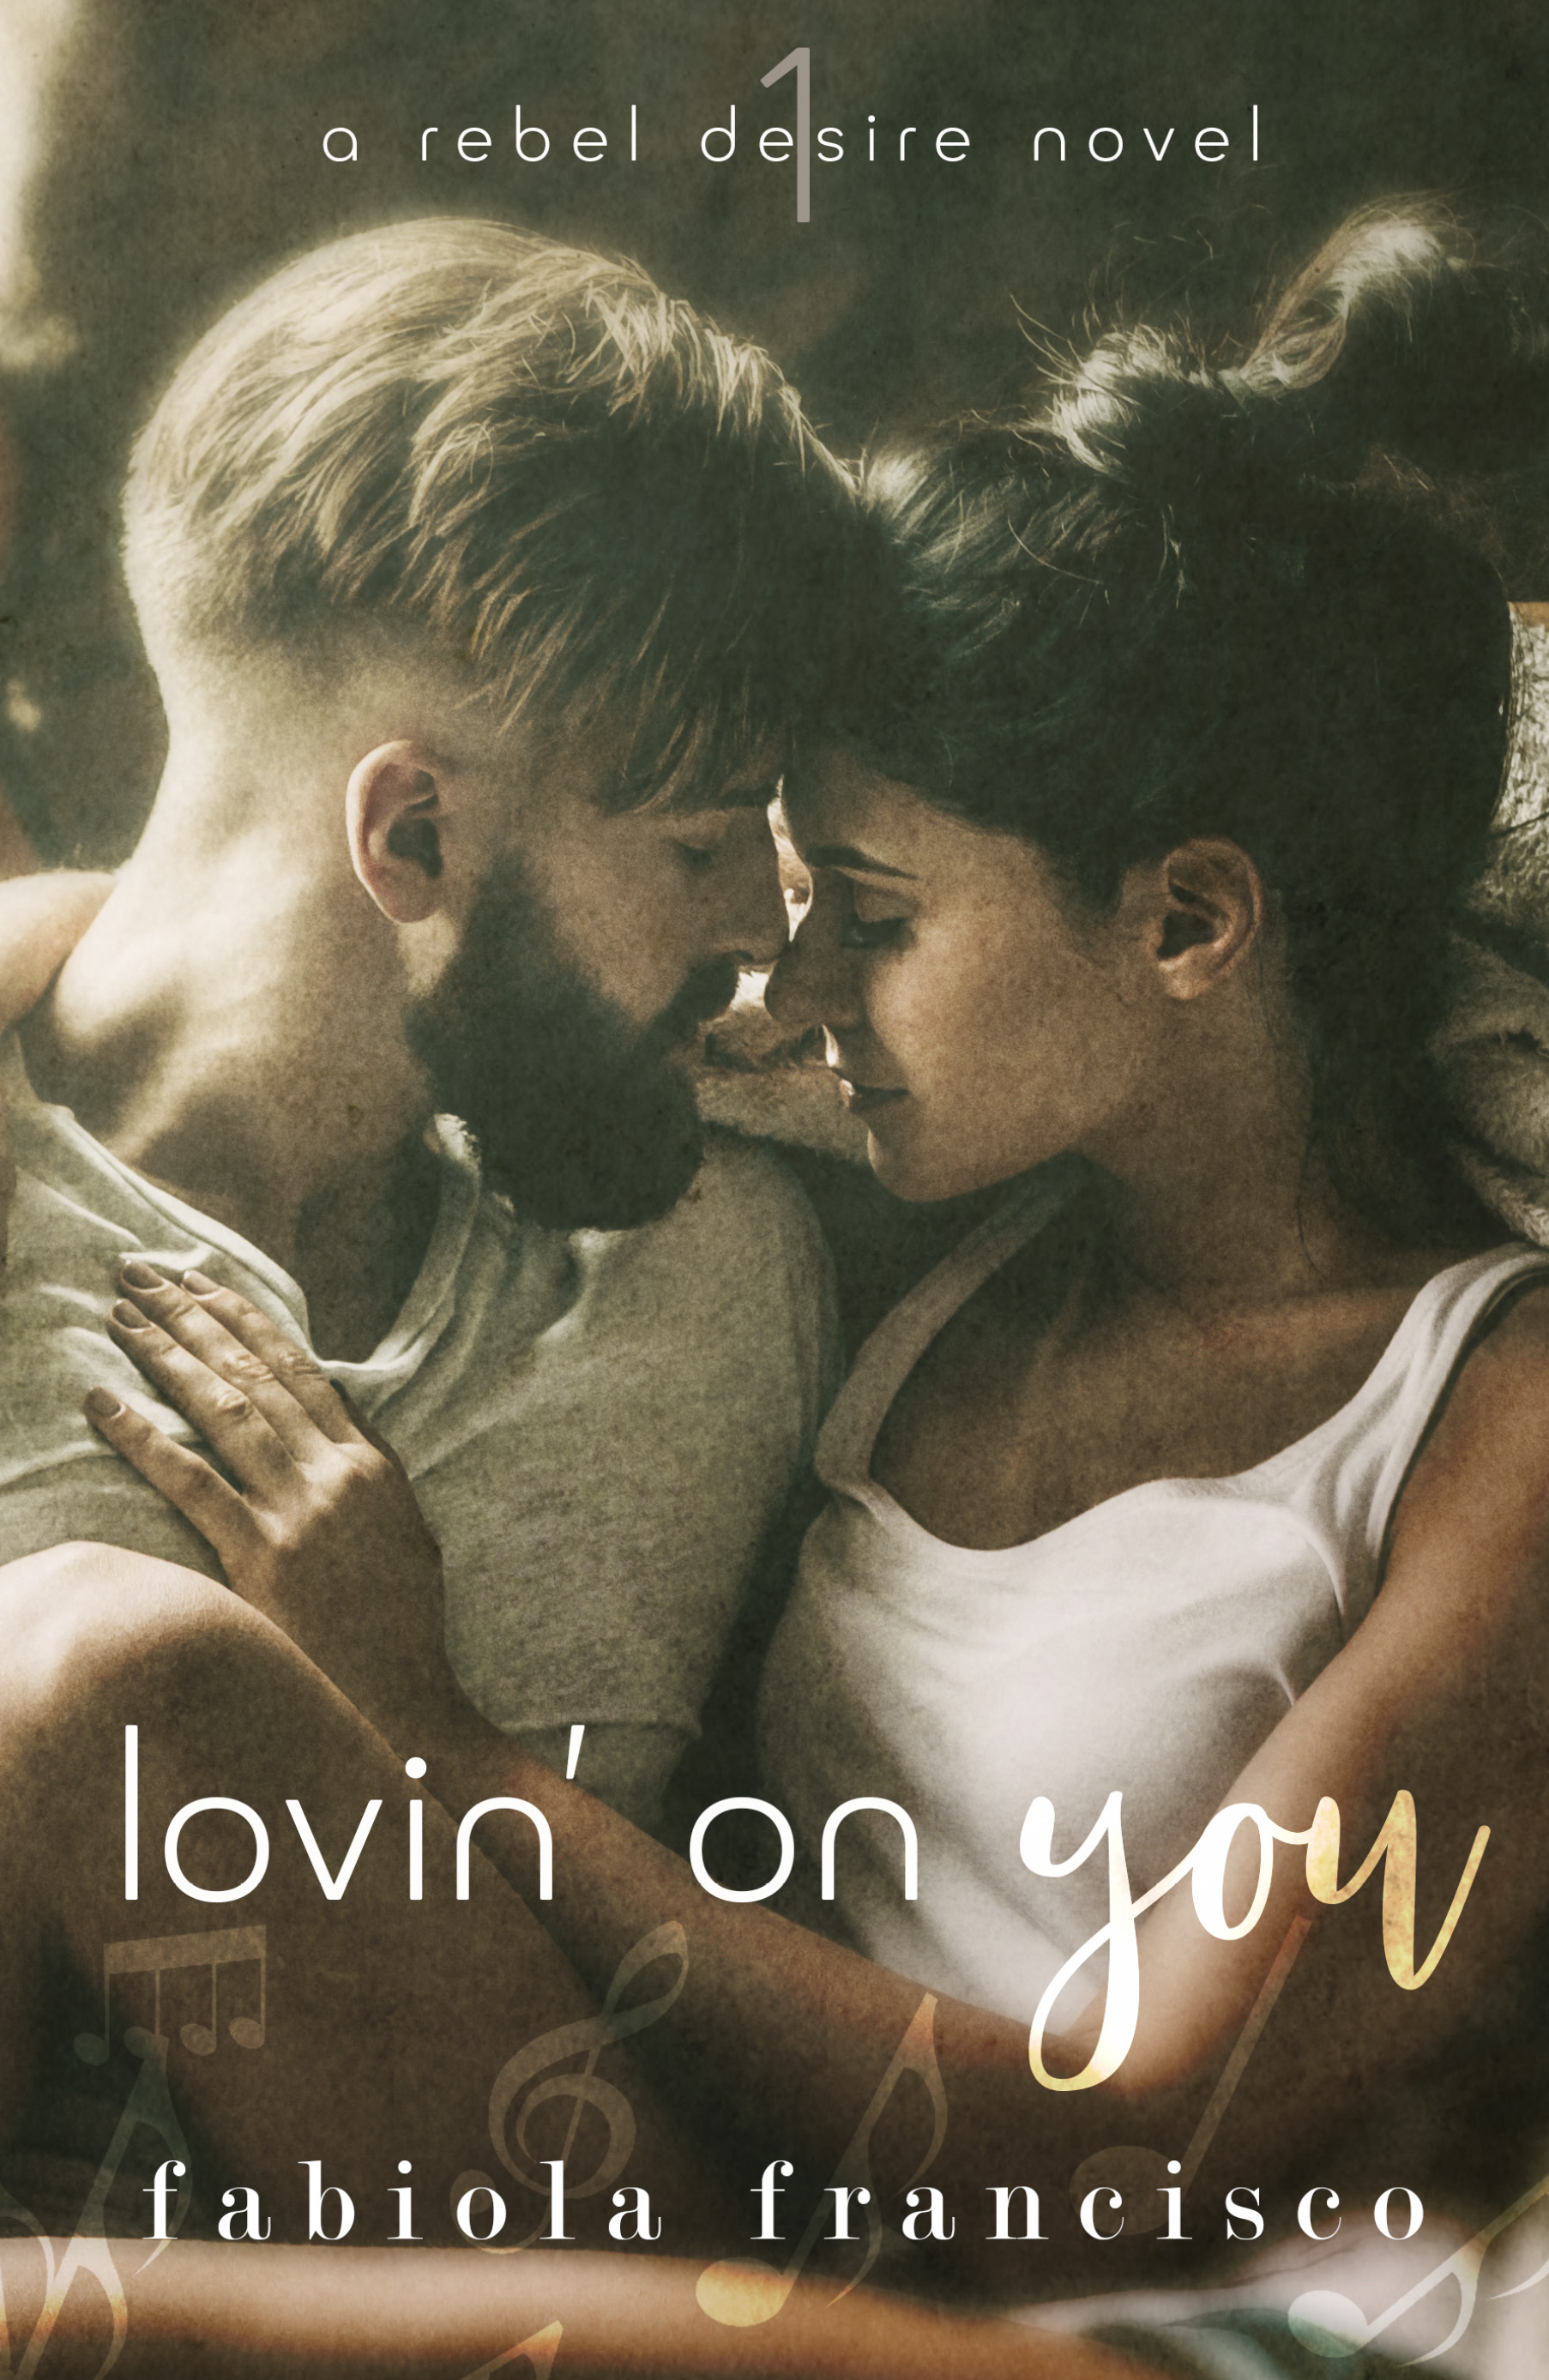  Lovin On You is the perfect country song kind of love, from the love to the heartbreak and back. Small town, country lovers will adore this one!